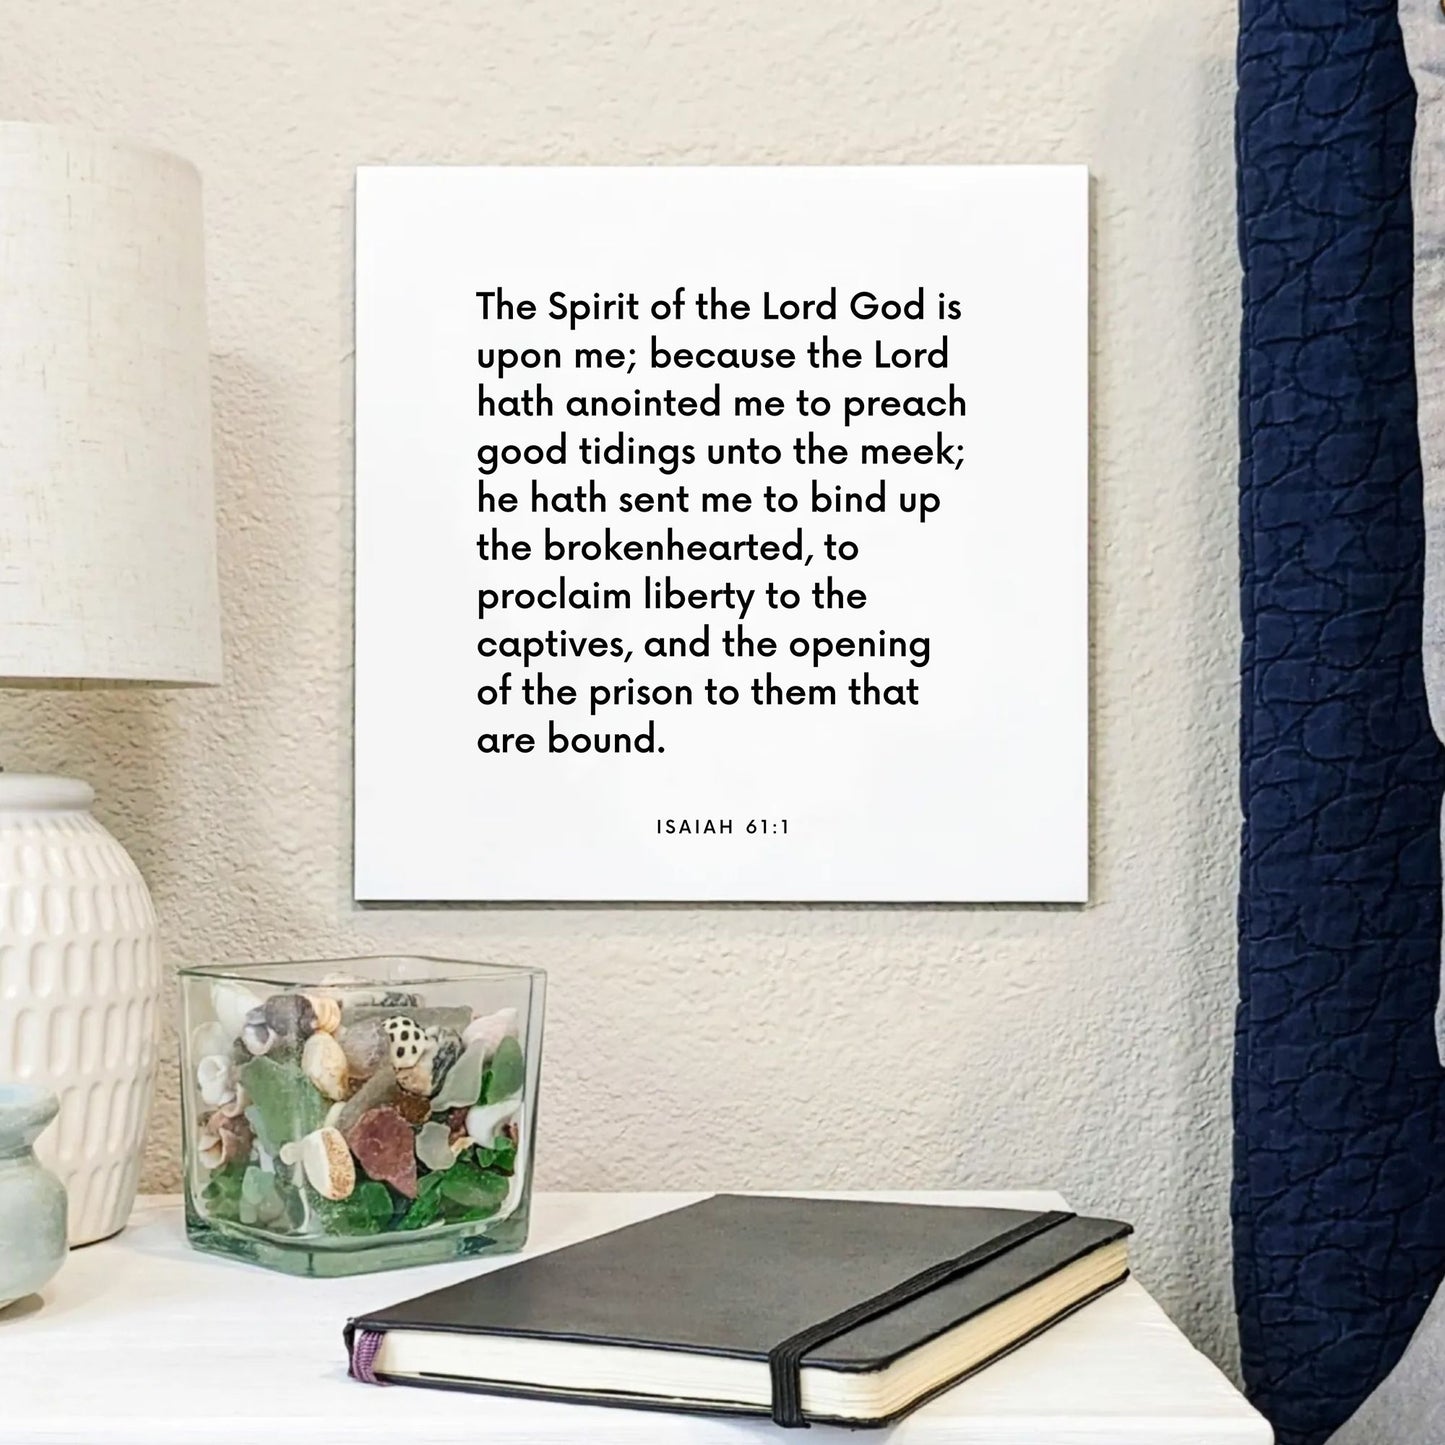 Bedside mouting of the scripture tile for Isaiah 61:1 - "He hath sent me to bind up the brokenhearted"